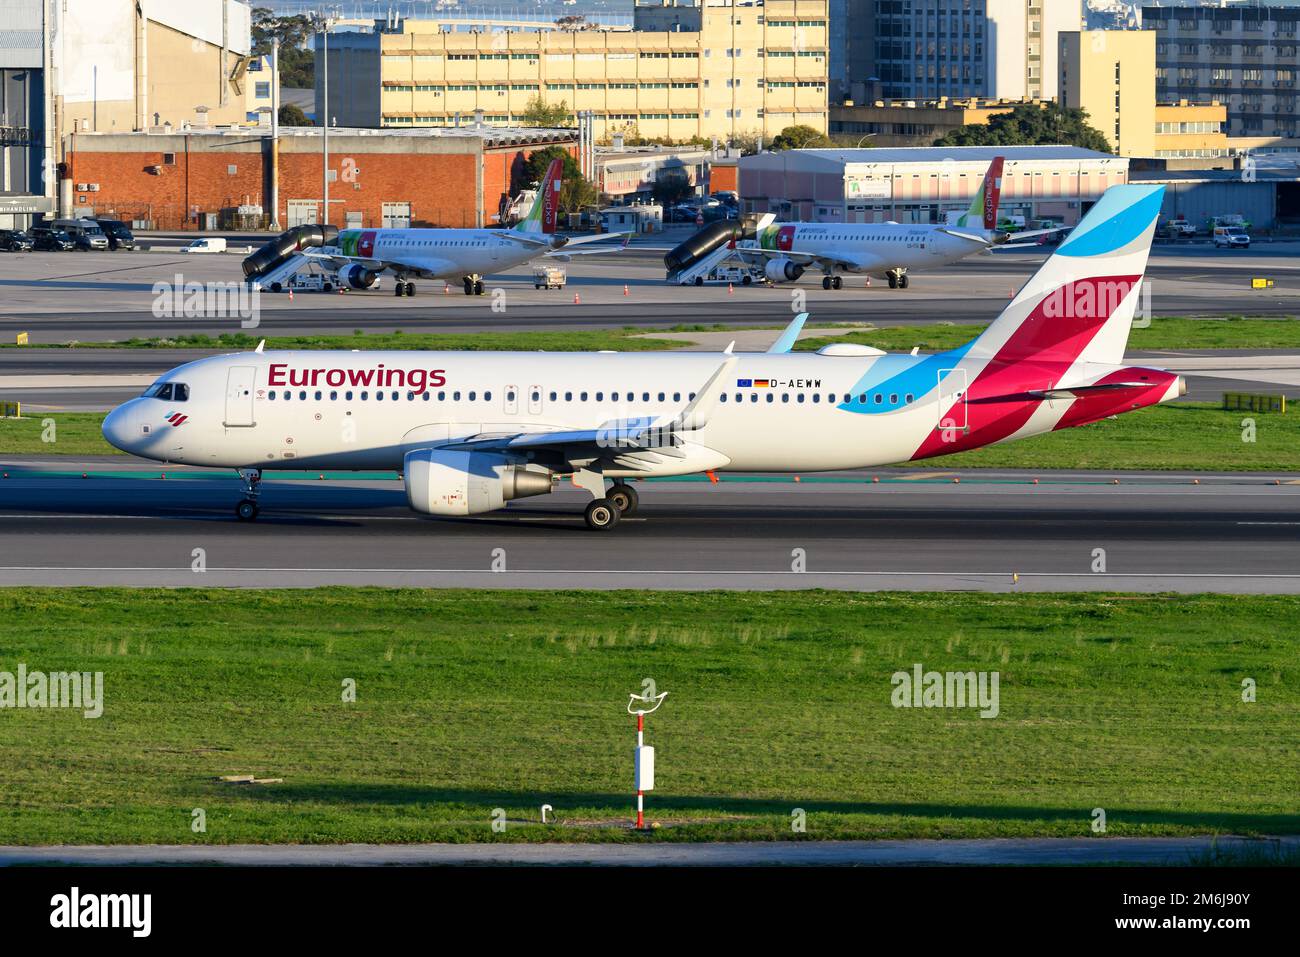 Eurowings Airbus A320 airplane landing. Aircraft A320 of EuroWings airline. Plane registered as D-AEWW. Stock Photo